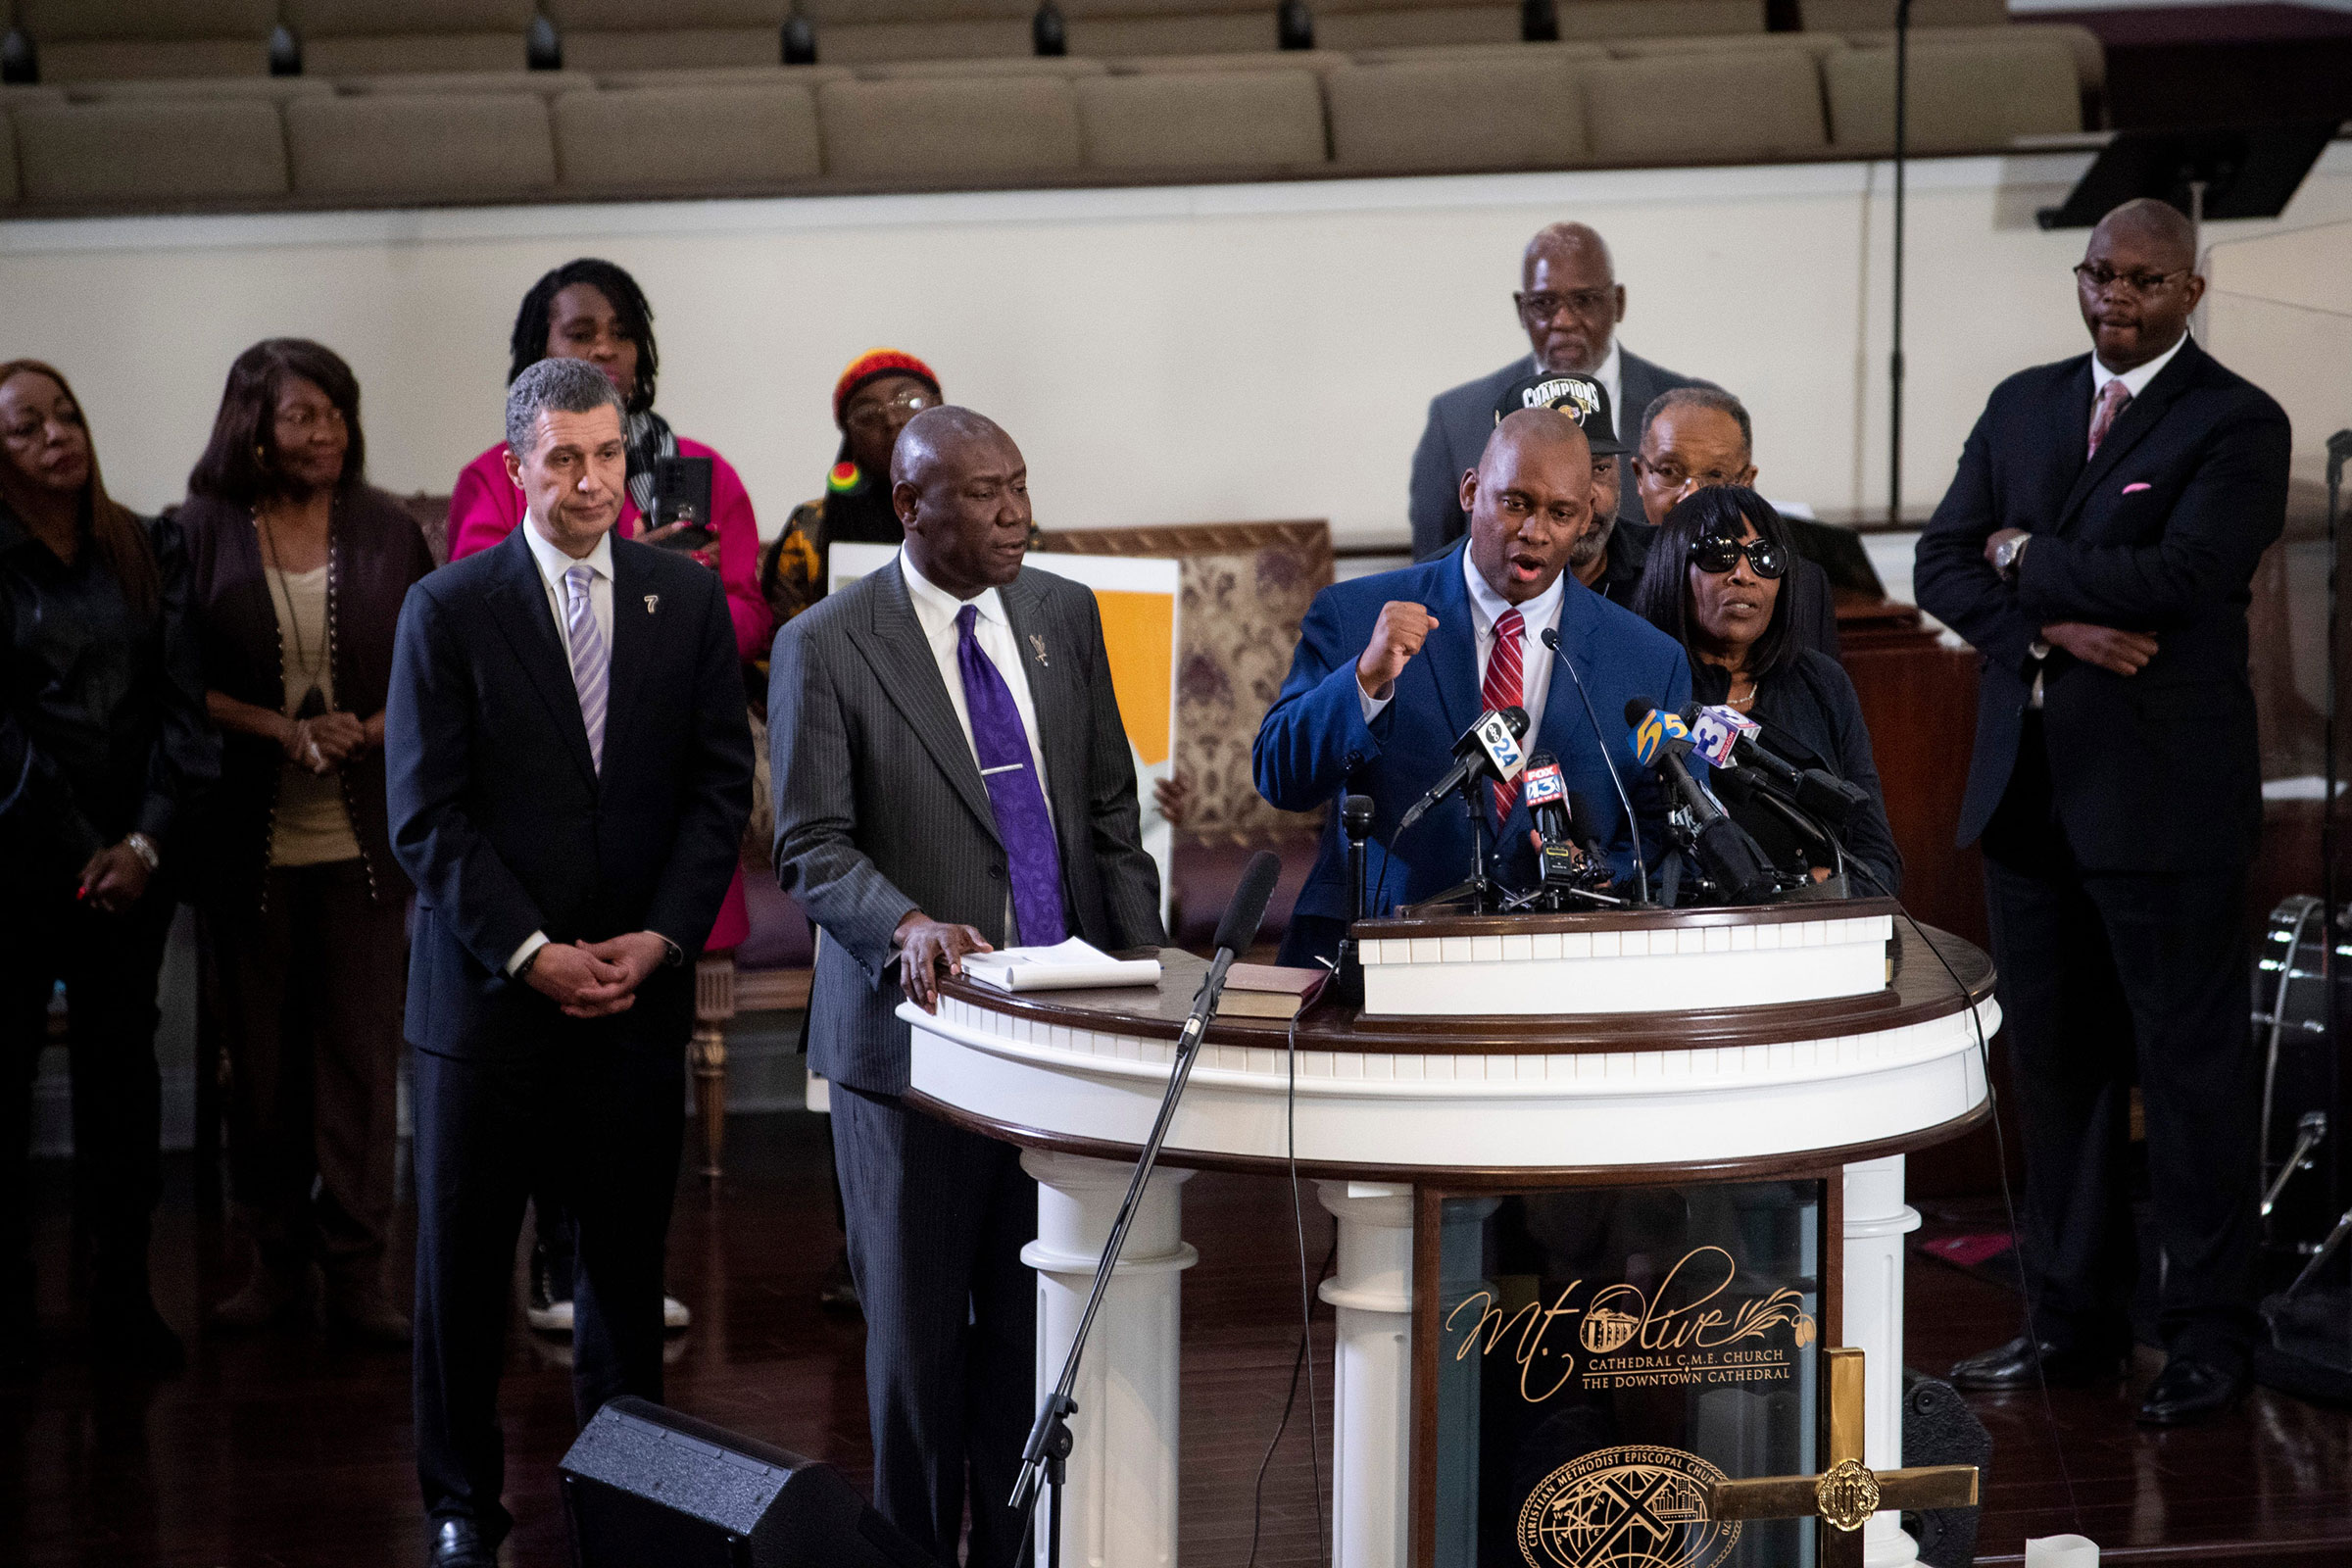 Van Turner, the president of the Memphis branch of NAACP, members of Tyre Nichols' family, and lawyers representing the family attend a press conference at Mt. Olive Cathedral CME Church in Memphis, Tenn., on Jan. 23, 2023.